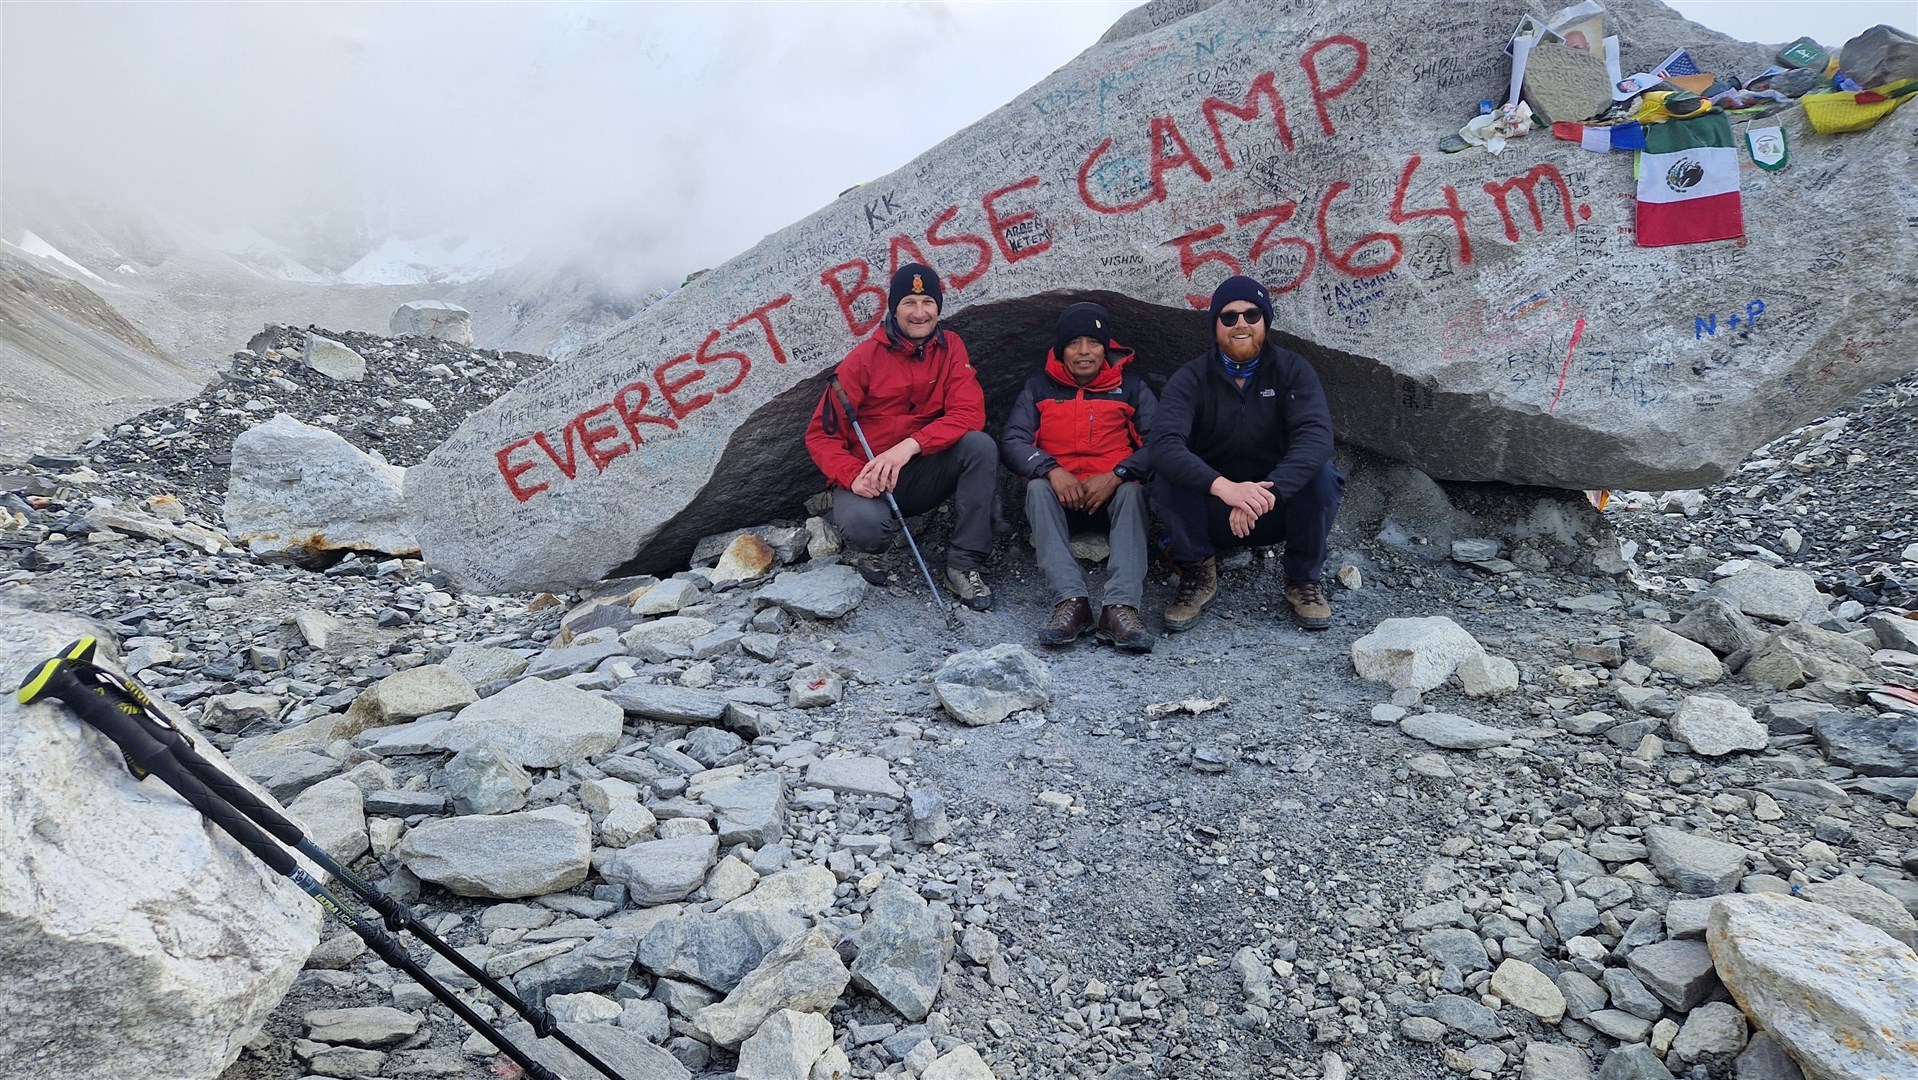 Stephen Wiltshire, Chandra Tamang Sherpa and Kyle Wiltshire at Everest Base Camp.